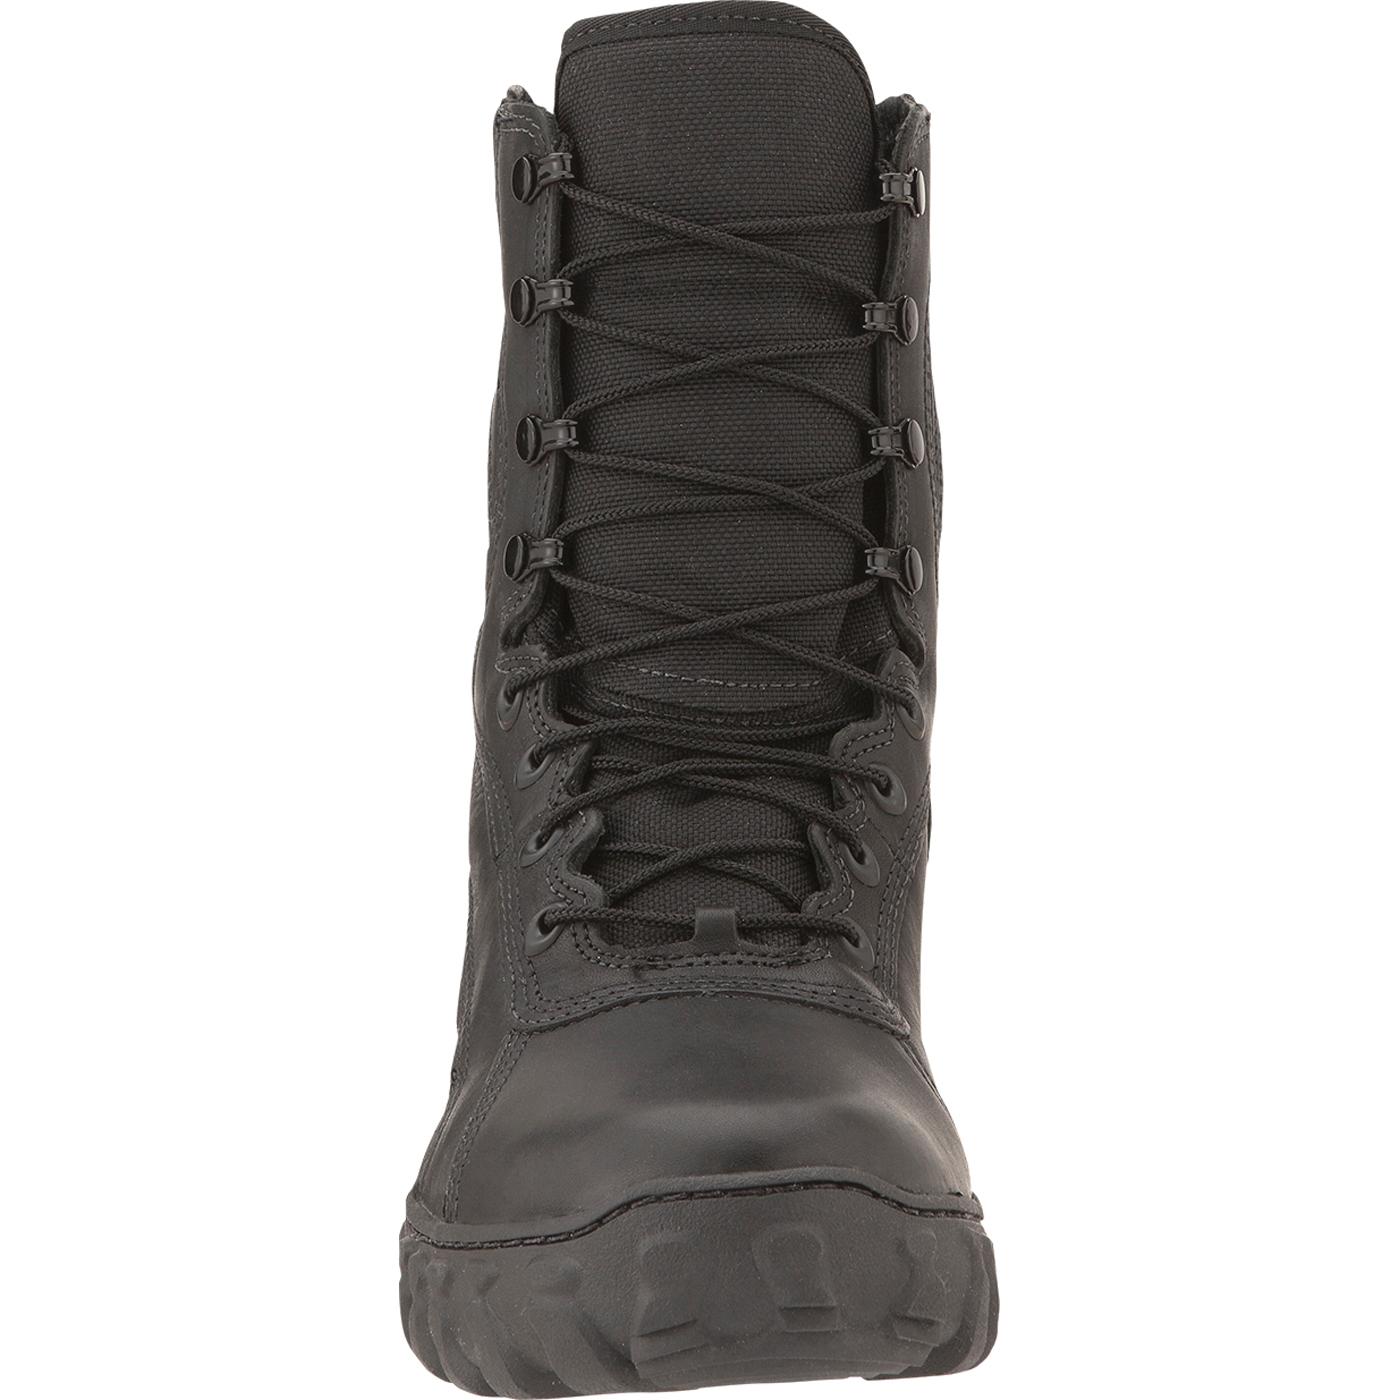 Rocky S2V GORE-TEX Waterproof Black Tactical Military Boot